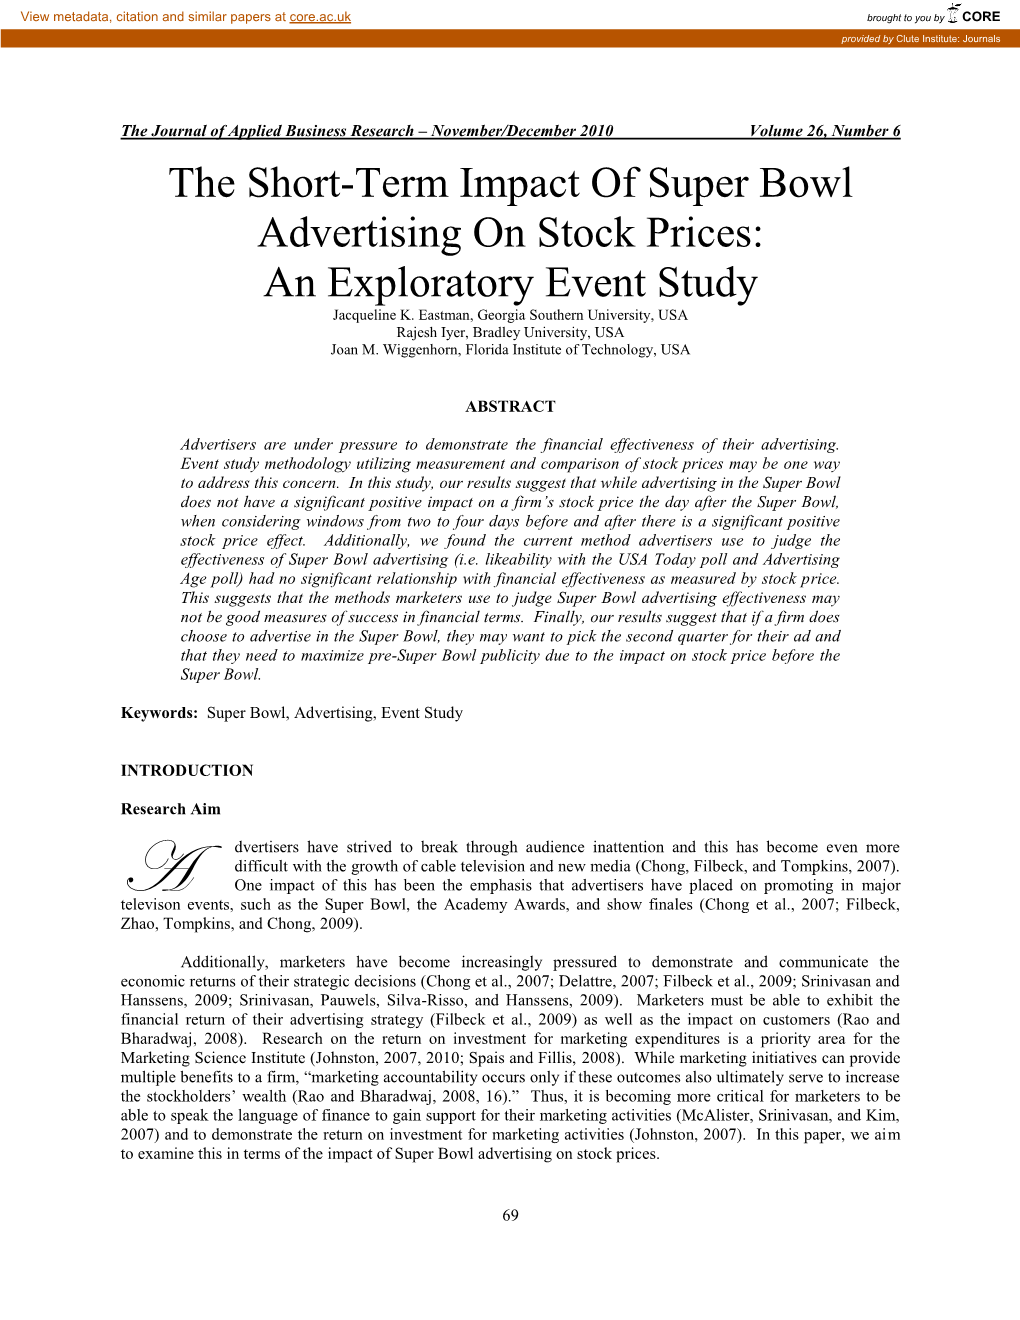 The Short-Term Impact of Superbowl Advertising on Stock Prices